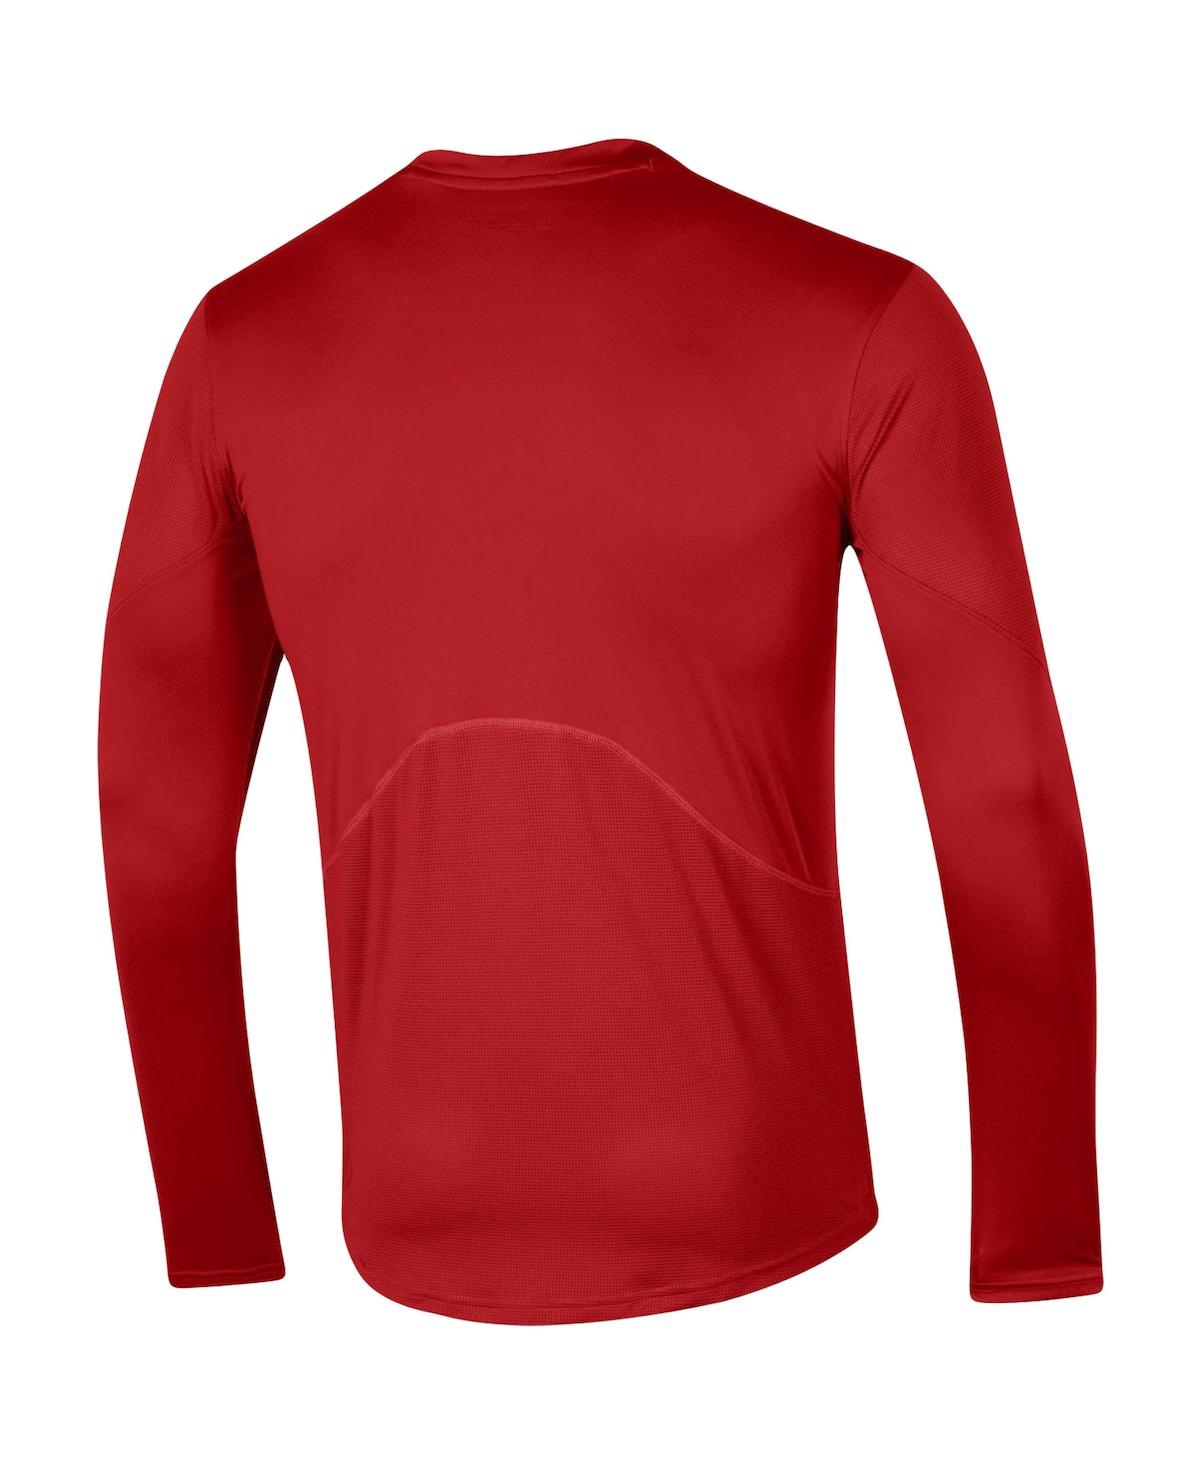 Shop Under Armour Men's  Red Wisconsin Badgers 2021 Sideline Training Performance Long Sleeve T-shirt